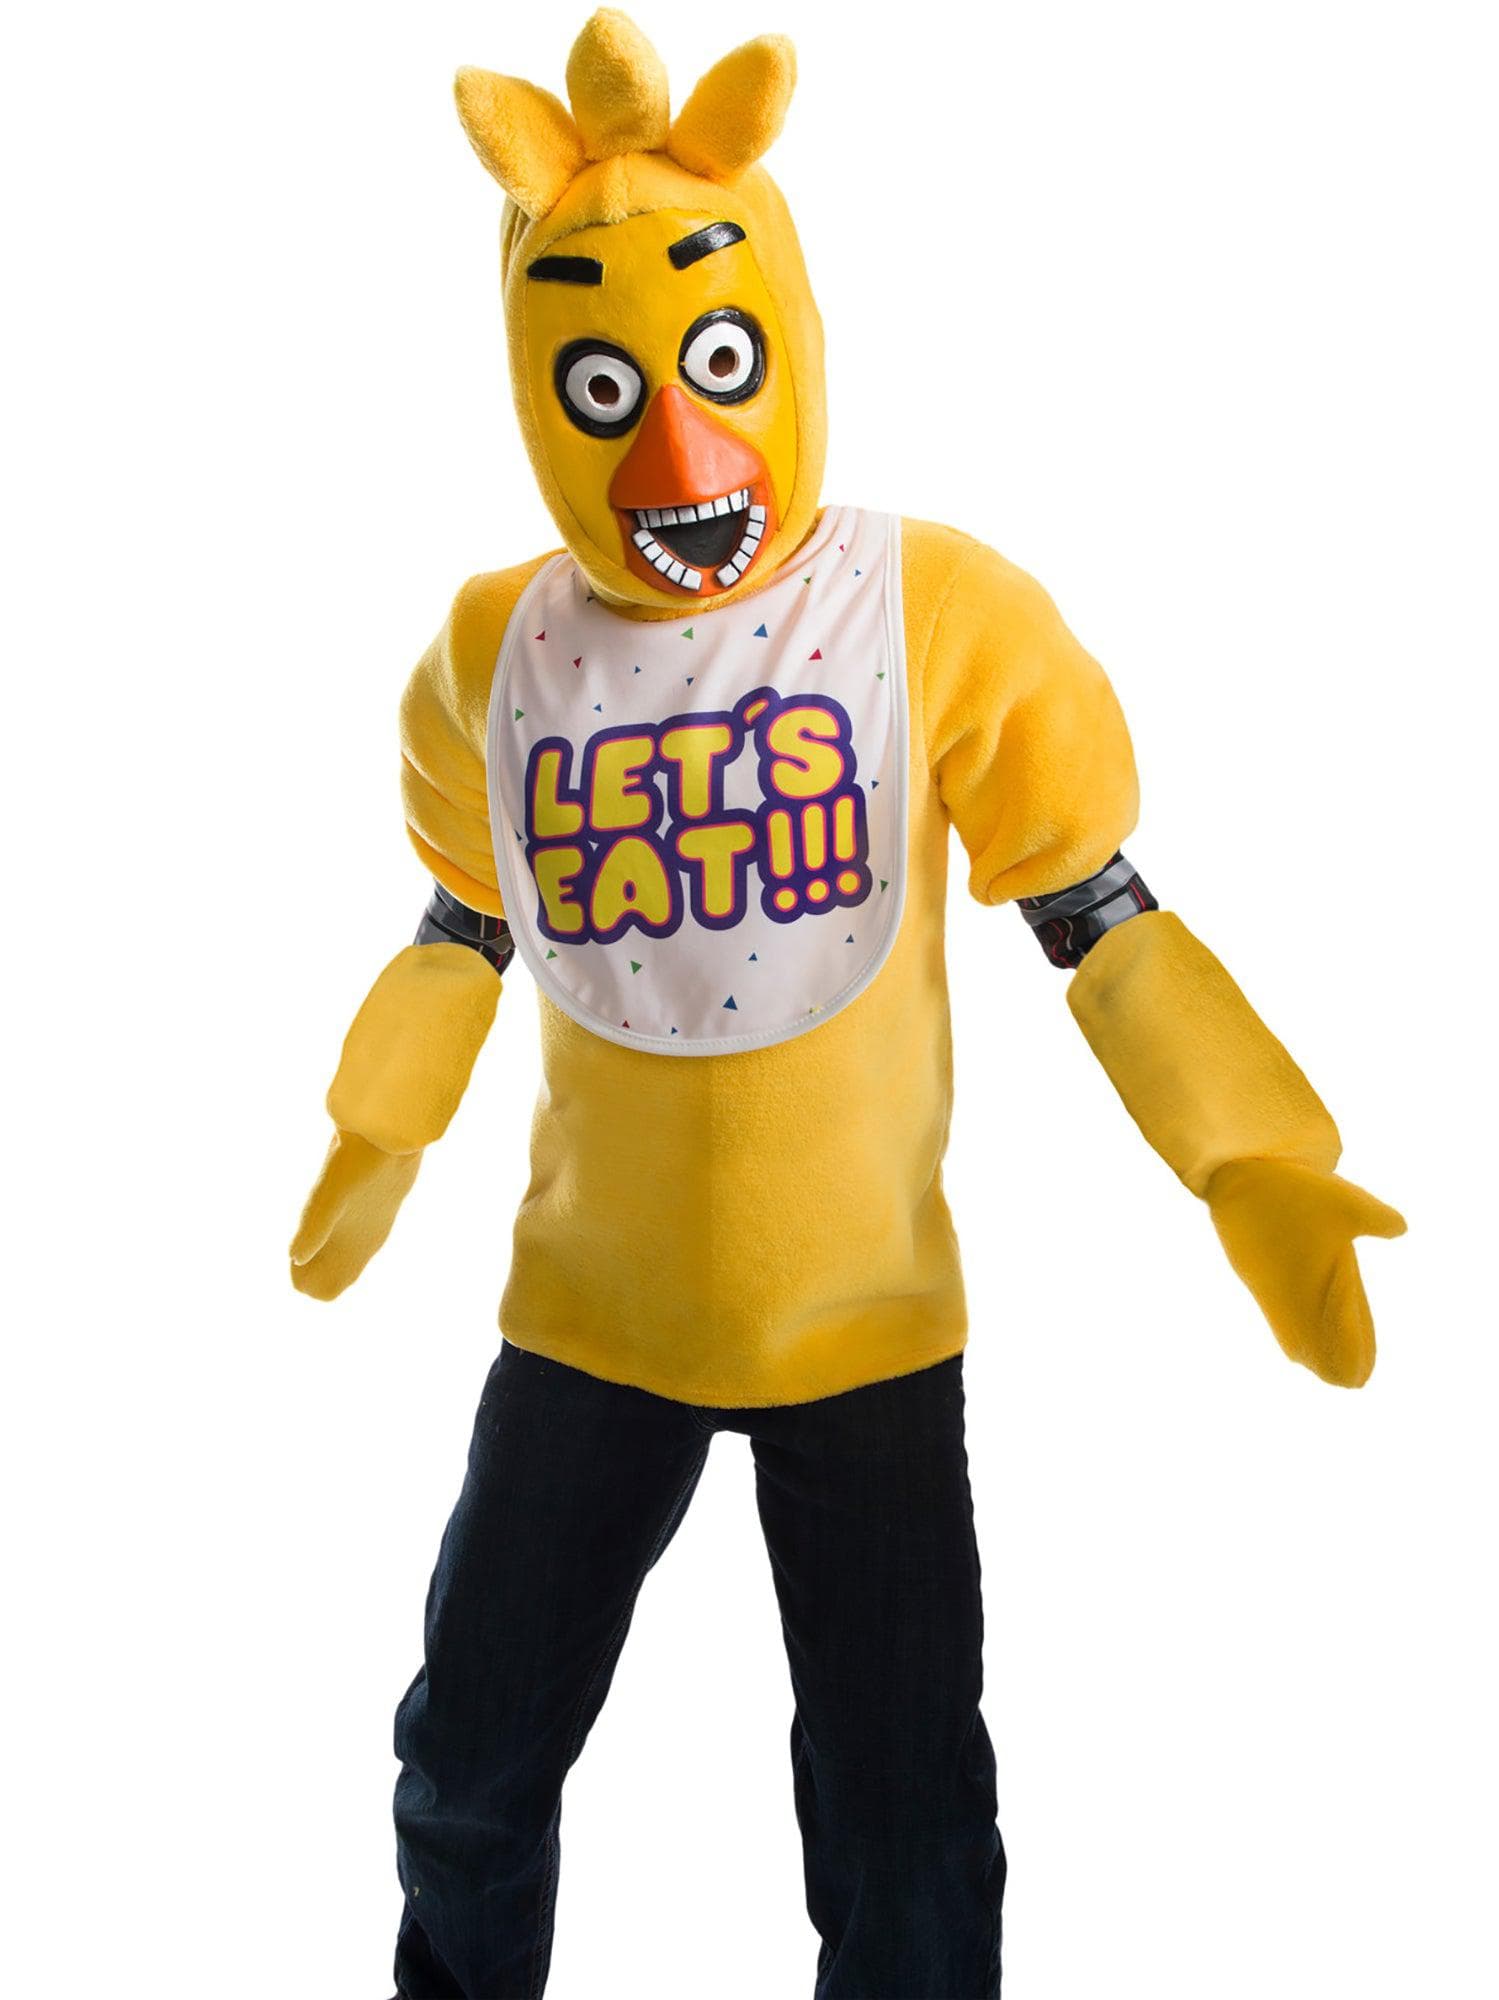 Kids Five Nights At Freddys Chica Deluxe Costume - costumes.com